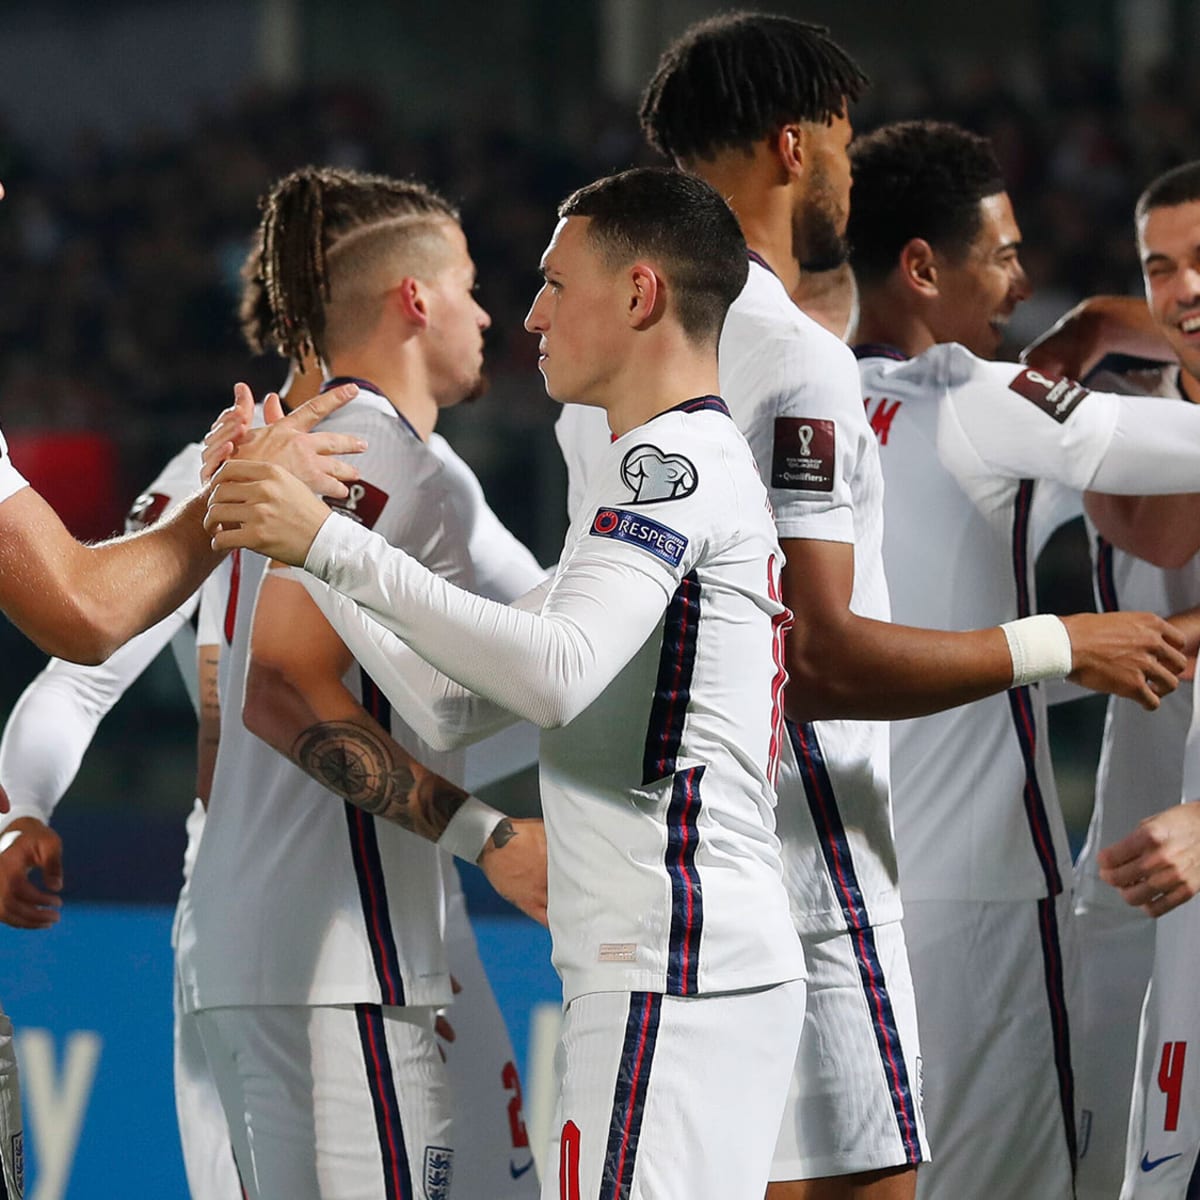 England 2022 World Cup outlook: What's the Three Lions' ceiling?